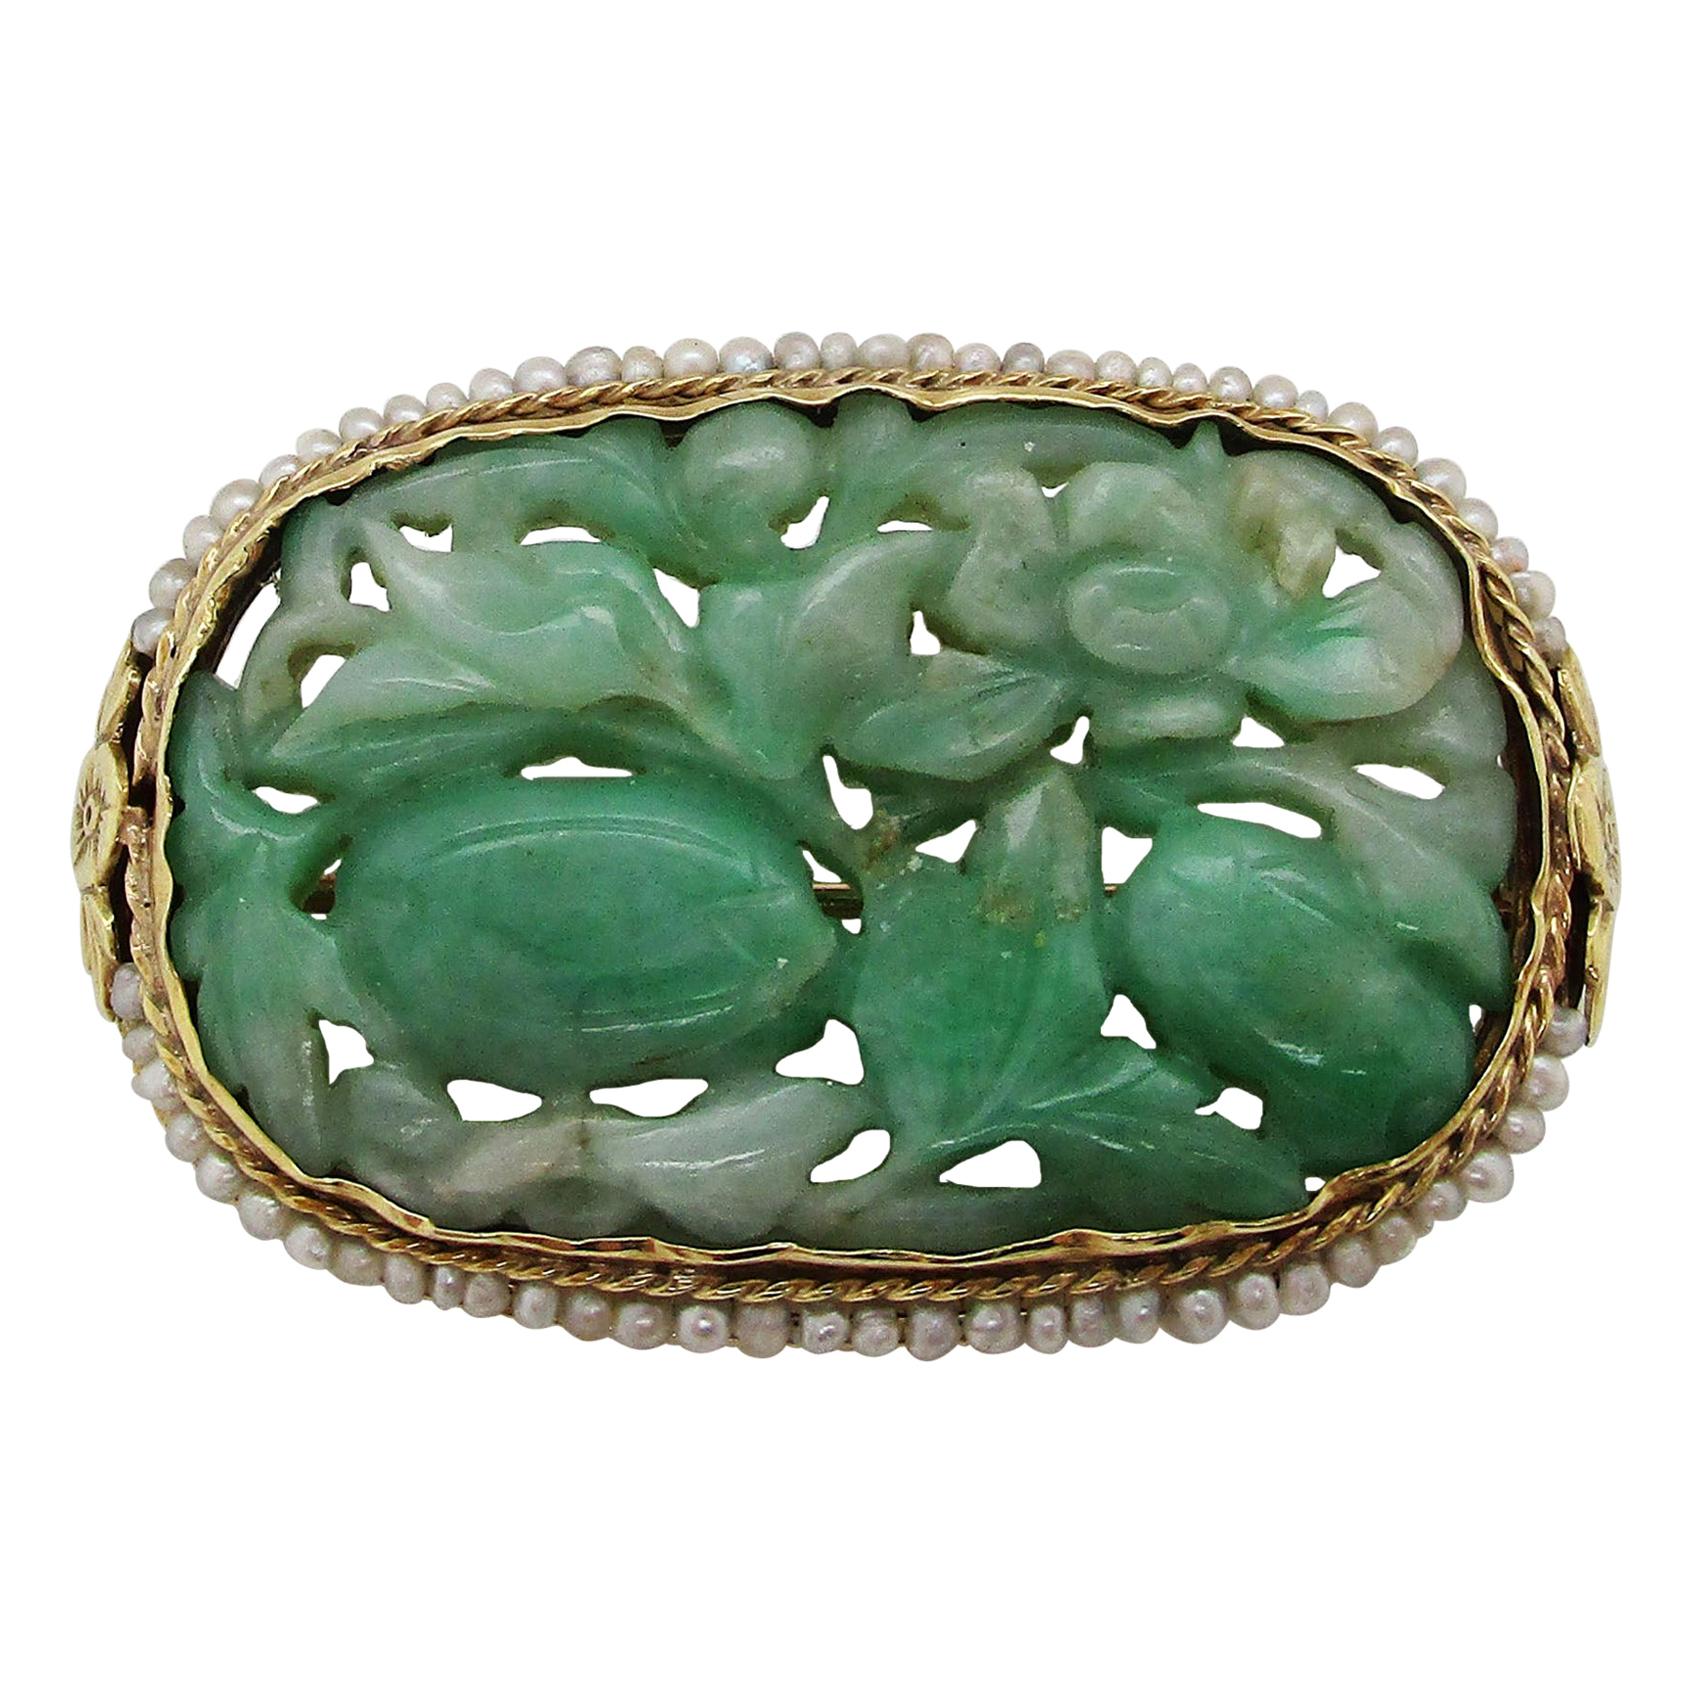 1910 Arts & Crafts 14 Karat Yellow Gold Carved Jade and Seed Pearl Brooch